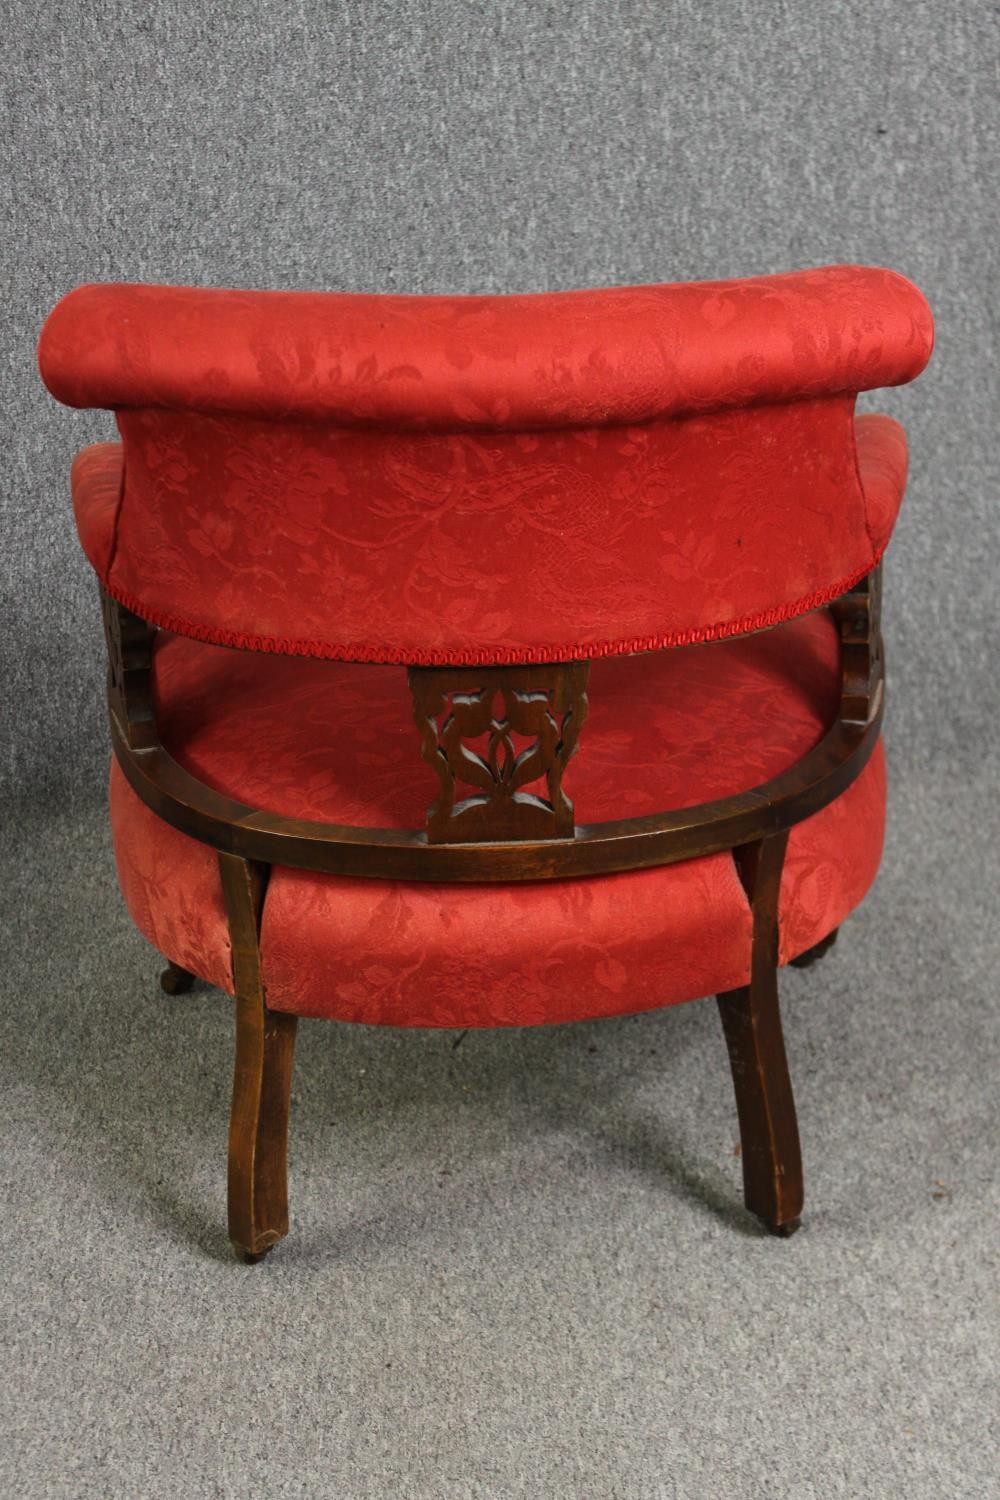 A pair of late Victorian walnut salon tub chairs, in red damask upholstery, H.74cm. (each). - Image 5 of 6